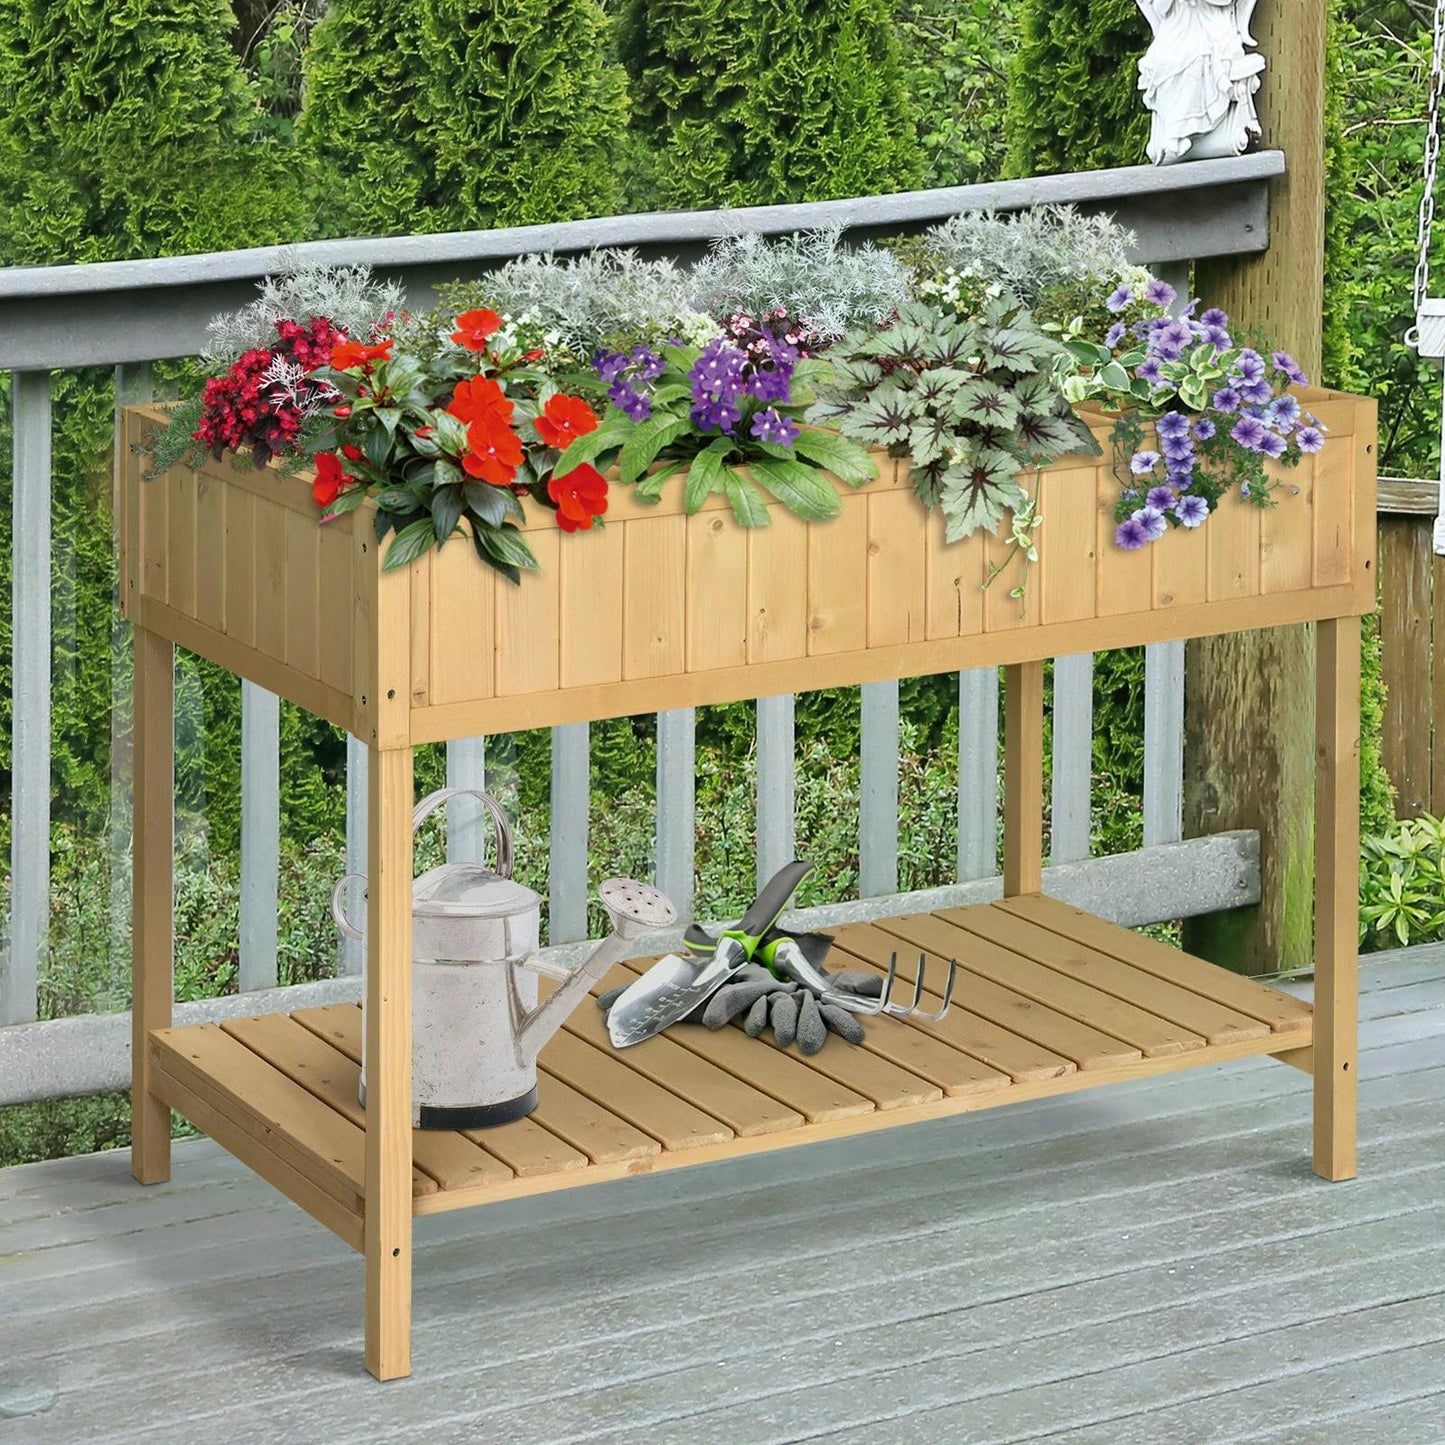 Outsunny Garden Wooden Planters, Flower Box Raised, Rectangular 8 Compartment Plant Stand, Oak Tone